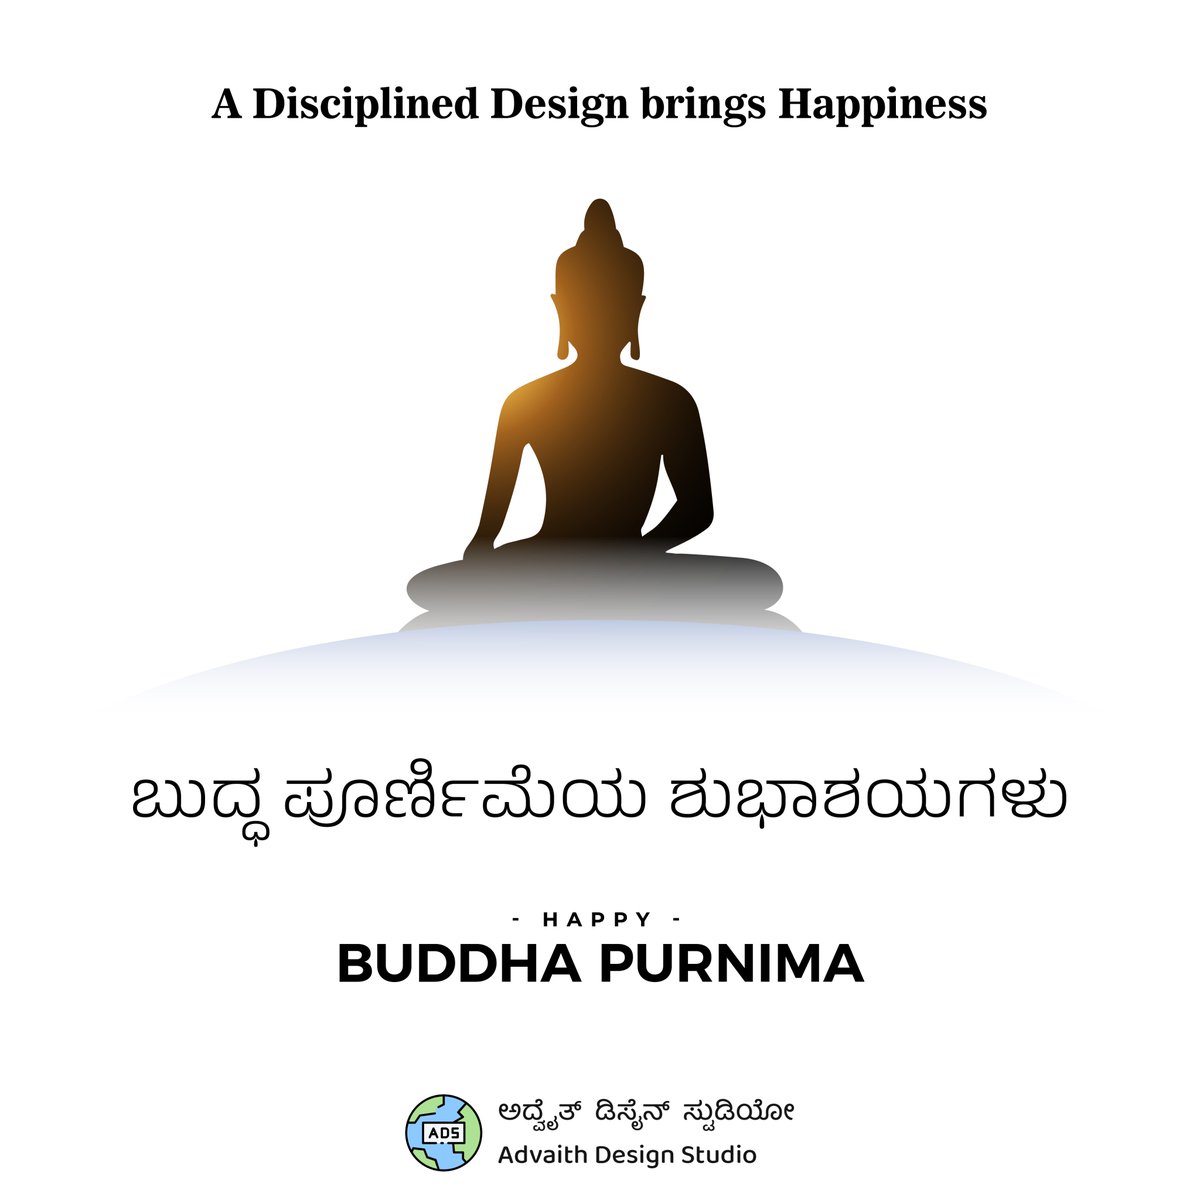 Let us live by the teachings of Lord Buddha to make the world happy and healthy.❤️

Happy Buddha Purnima😍
.
.
.
.
#buddhajayanti #buddhapurnima #buddha #buddhism #buddhapurnima2023  #creativeads #creativeadvertising #socialmediamanagers #branding #uidesign #advaithdesignstudio